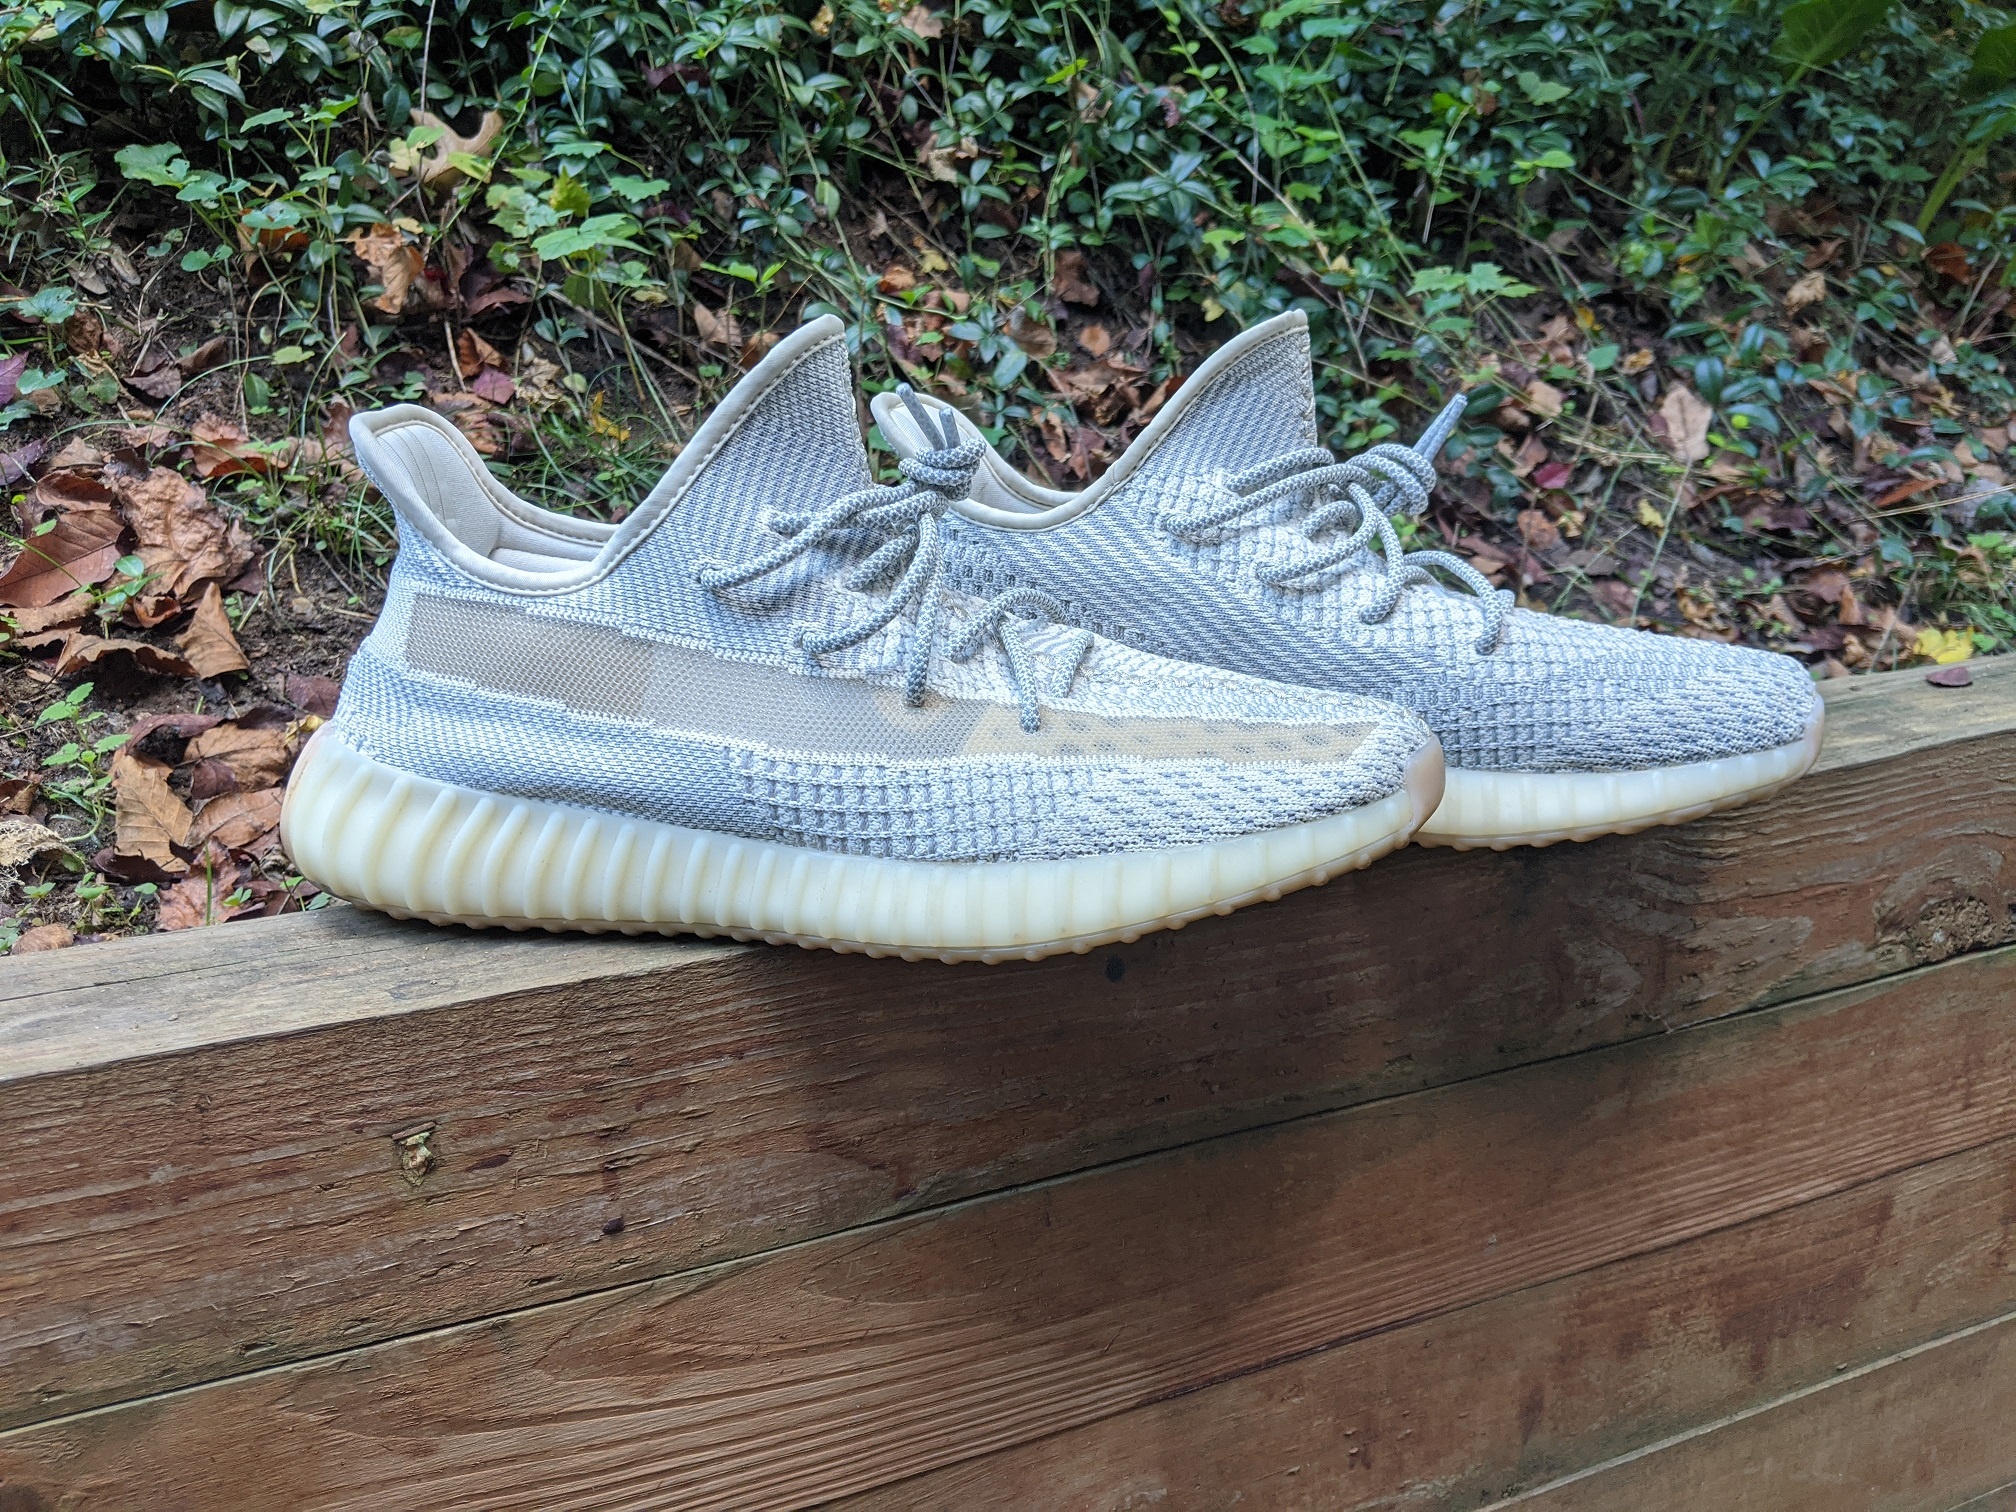 Yeezy 350 V2 Lundmark: 2 Years In. Worth the Hype?